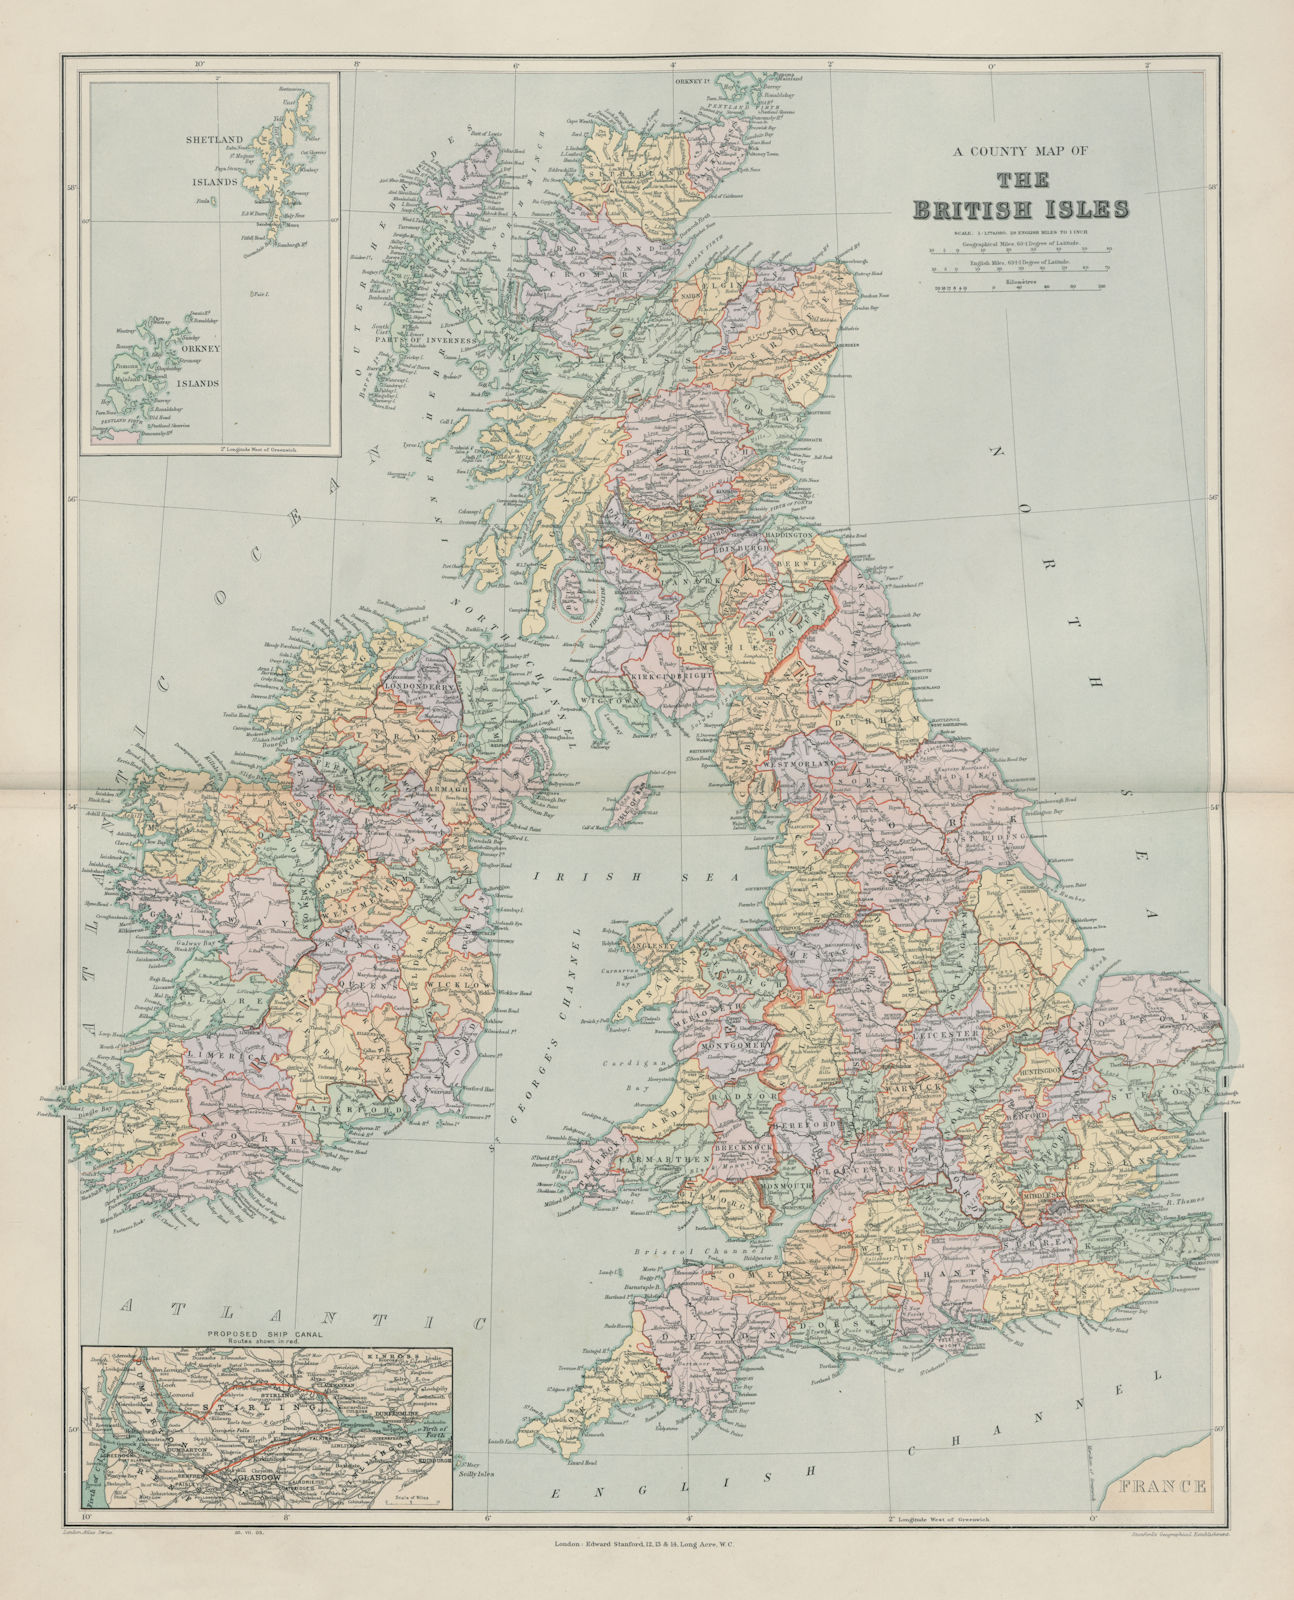 County map of the British Isles. England Ireland Scotland Wales. STANFORD 1904